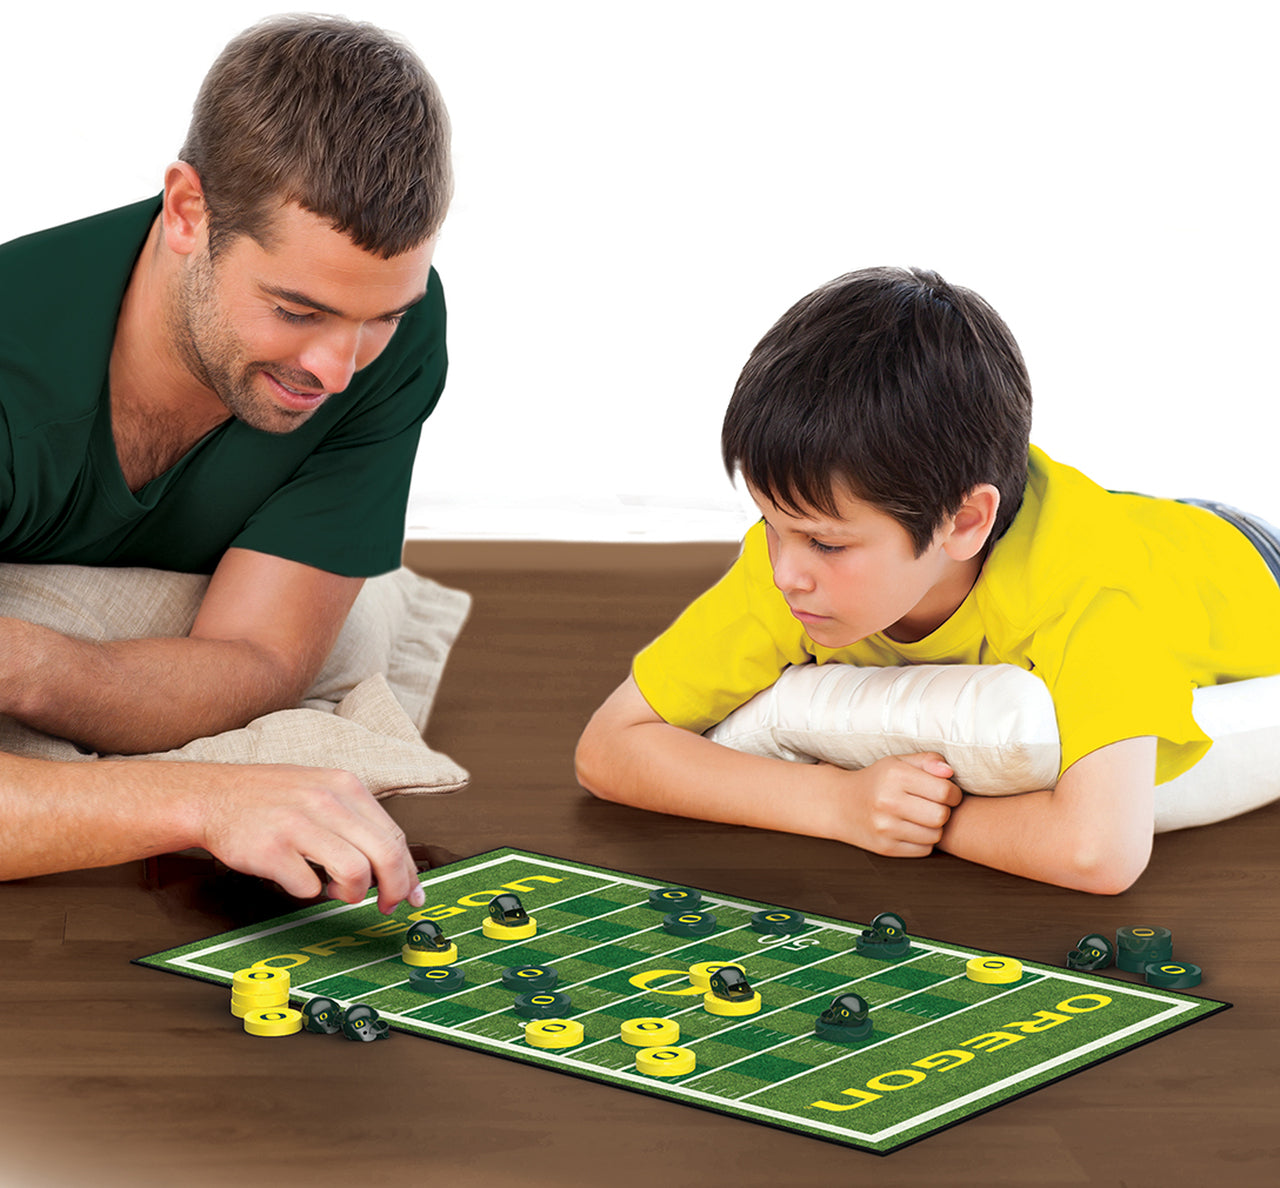 Oregon Ducks Checkers Board Game by Masterpieces